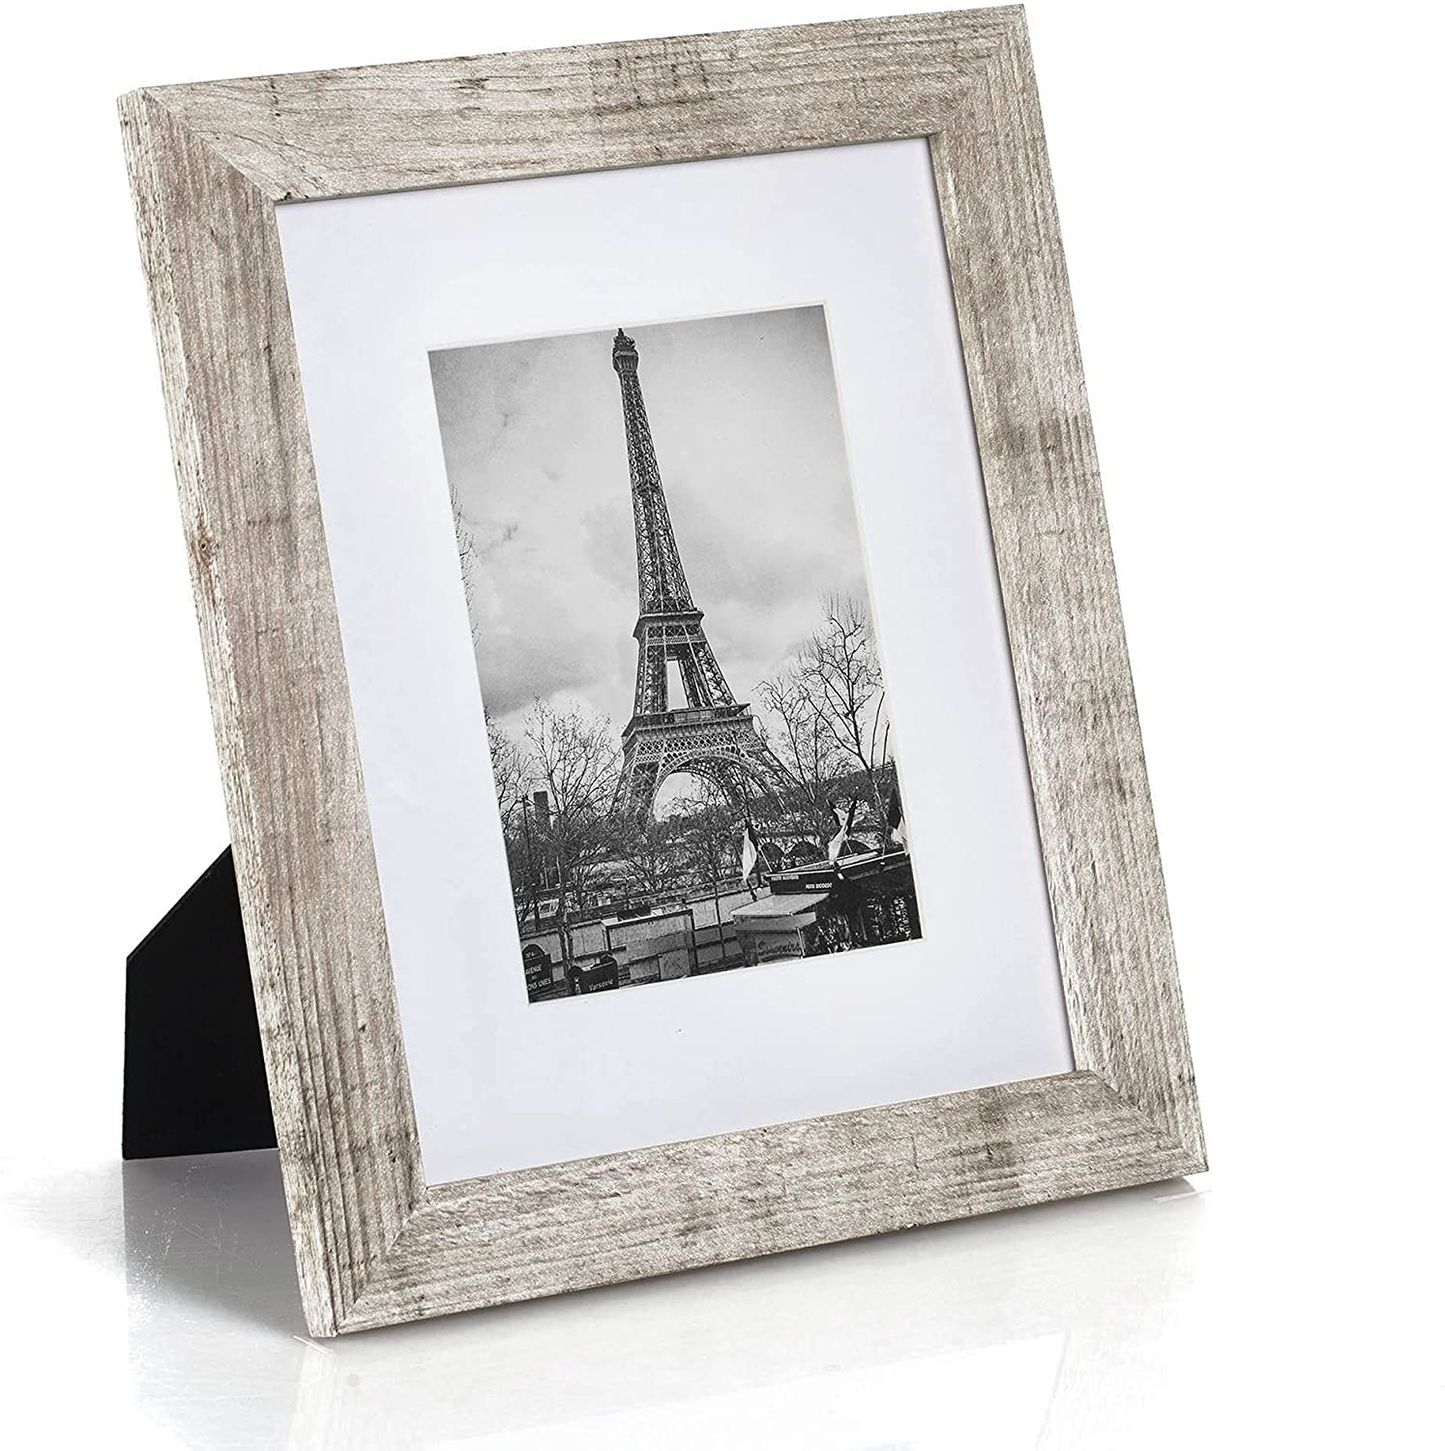 upsimples 8x10 Picture Frame Distressed Brown with Real Glass,Display Pictures 5x7 with Mat or 8x10 Without Mat,Multi Photo Frames Collage for Wall or Tabletop Display,Set of 6